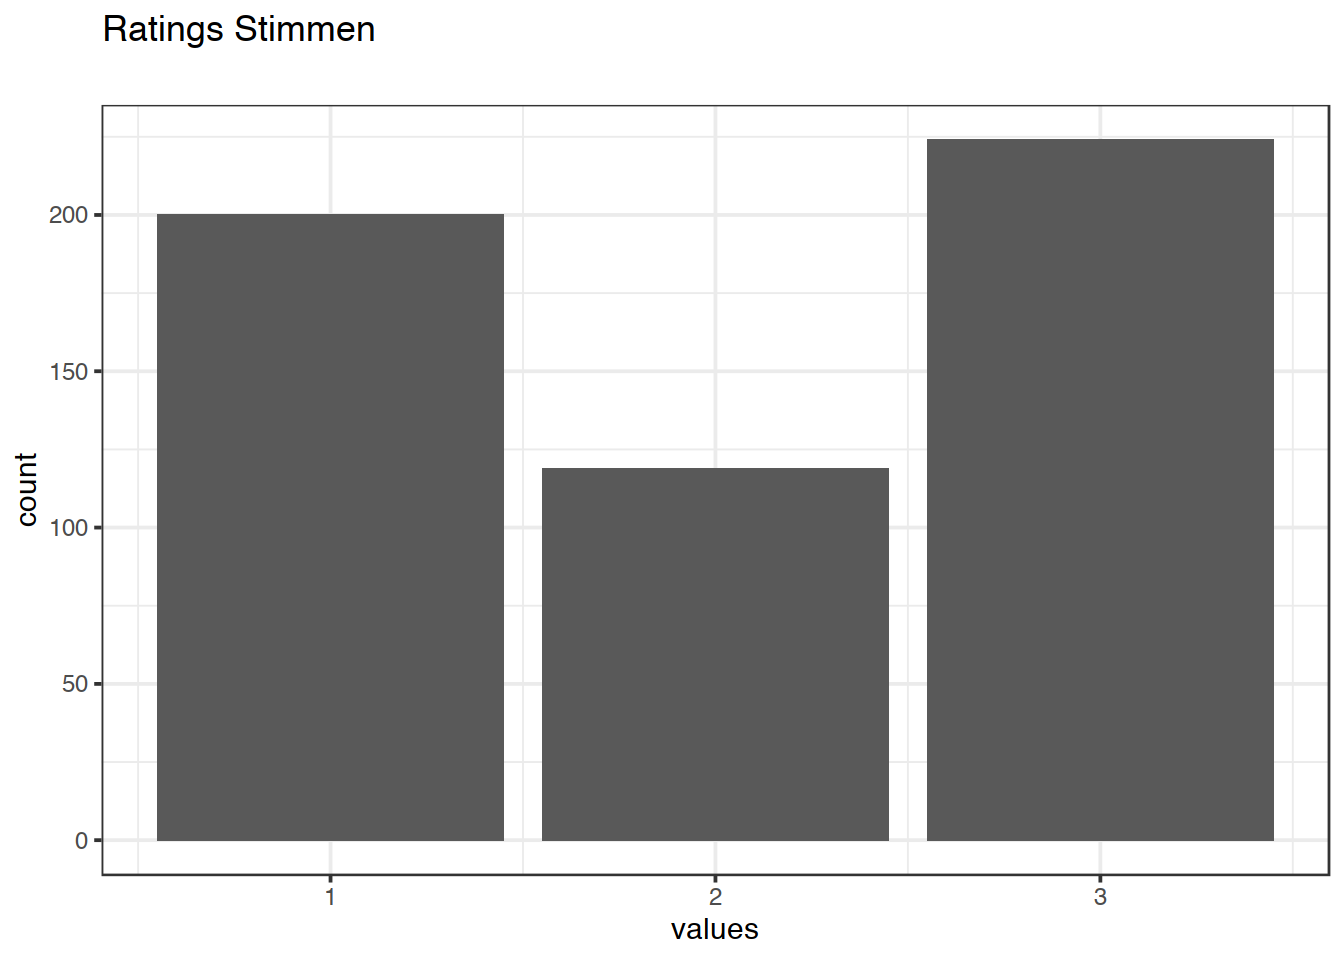 Distribution of values for Ratings Stimmen